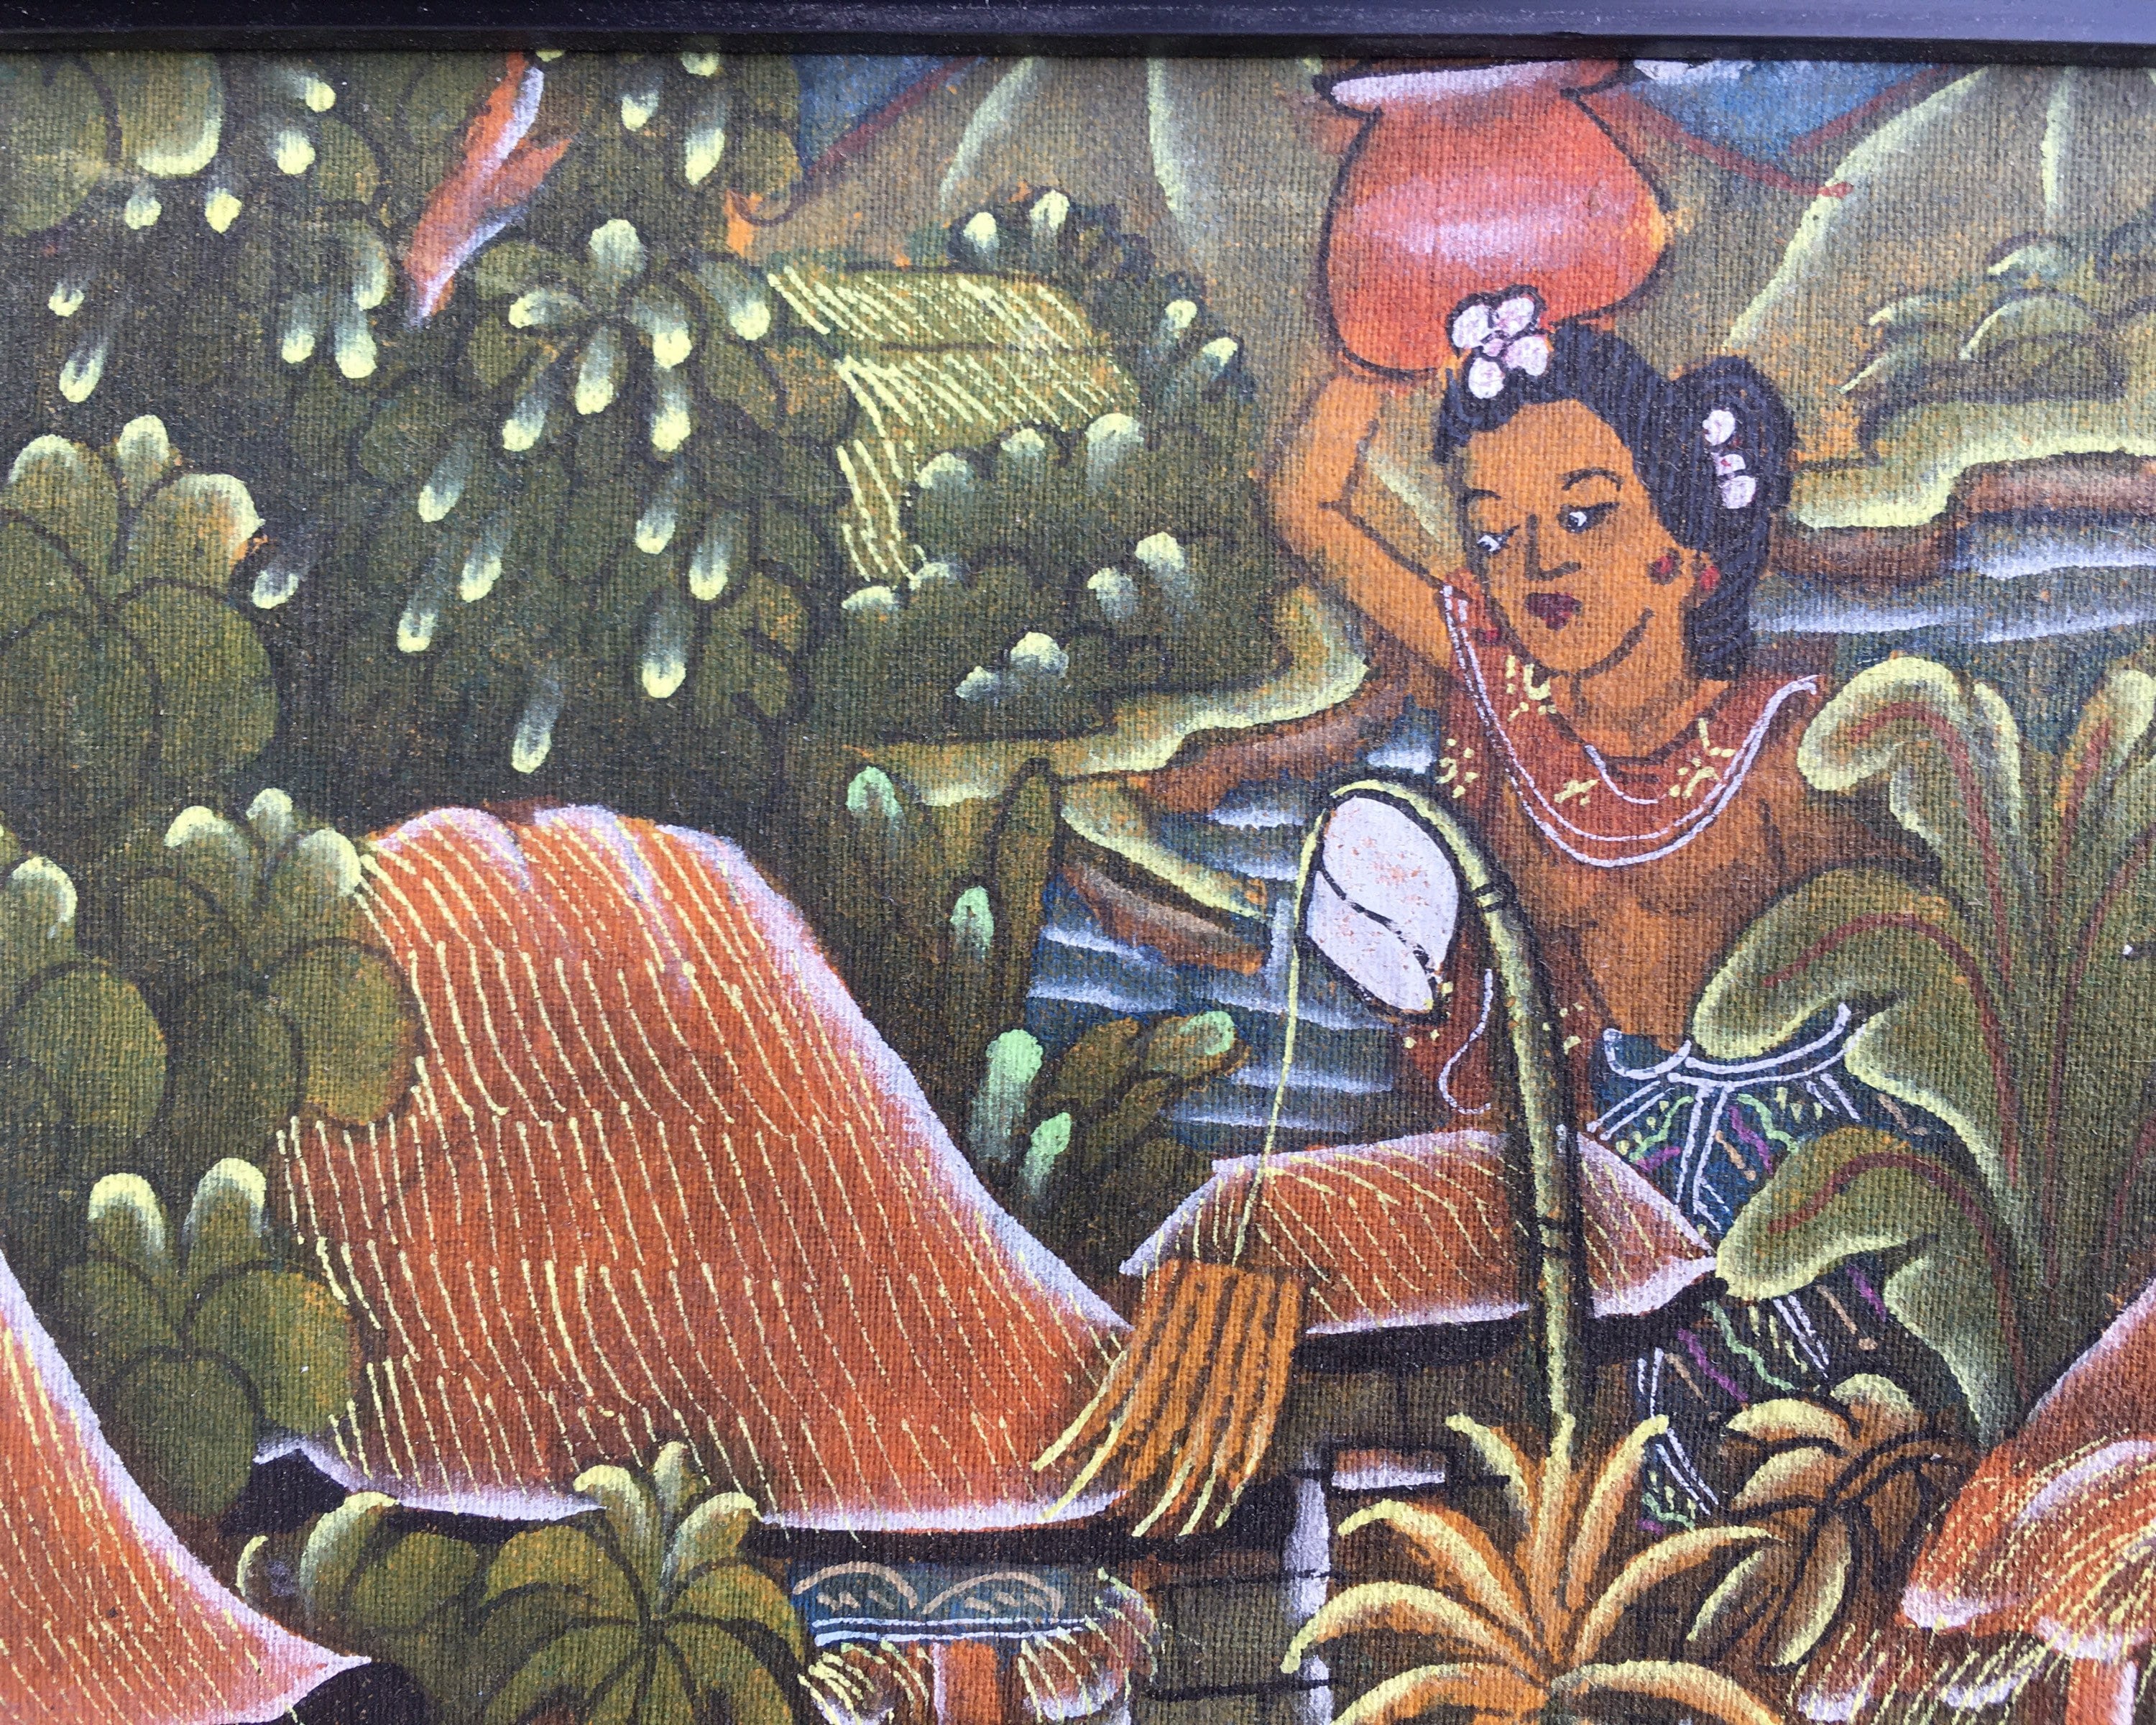  An image of a Balinese painting depicting a scene from an Indonesian folk story.